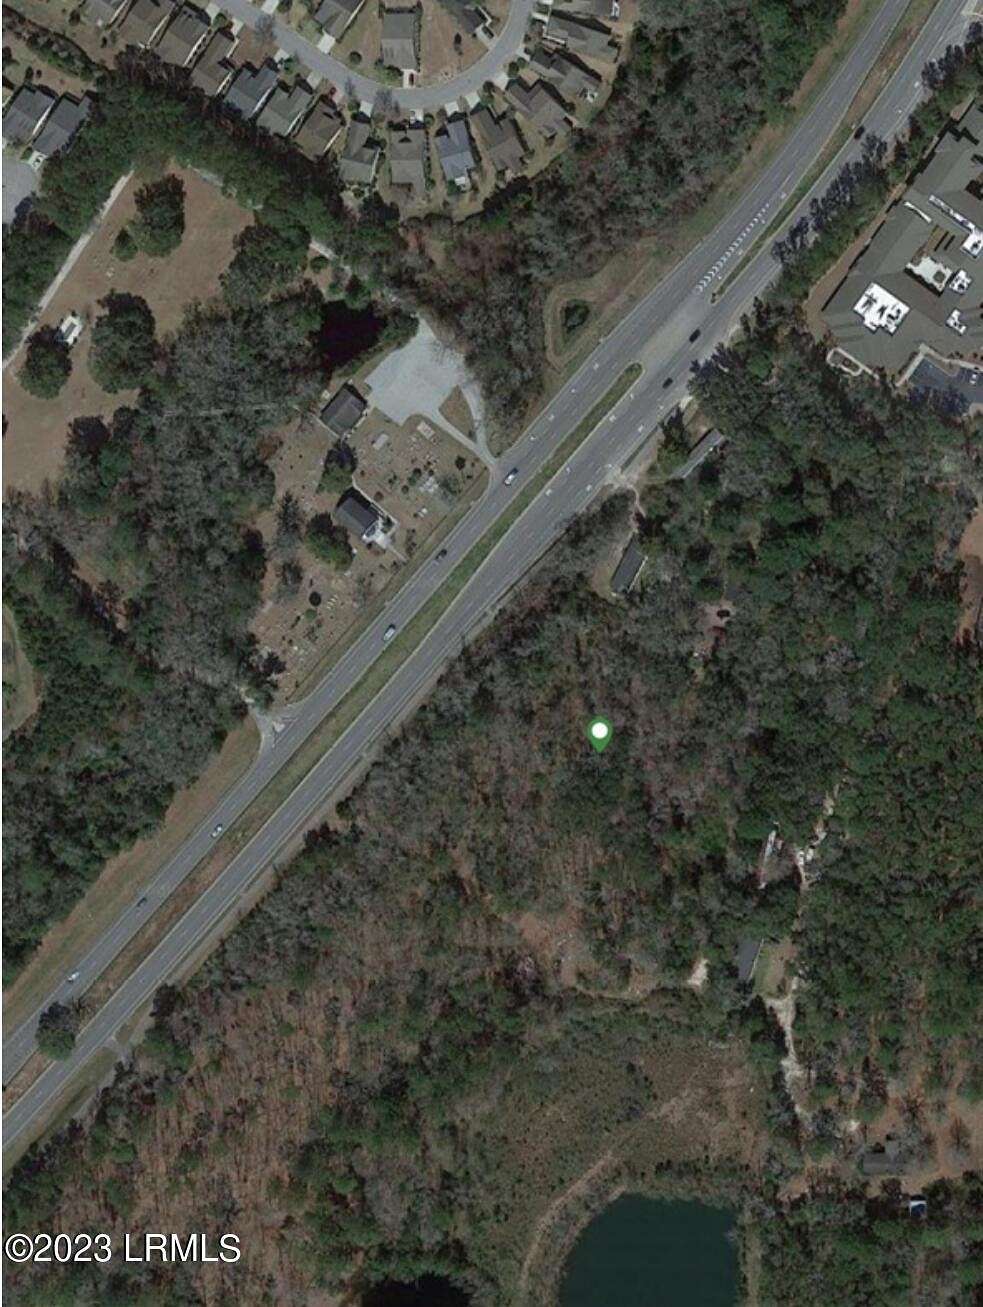 12.4 Acres of Mixed-Use Land for Sale in Bluffton, South Carolina